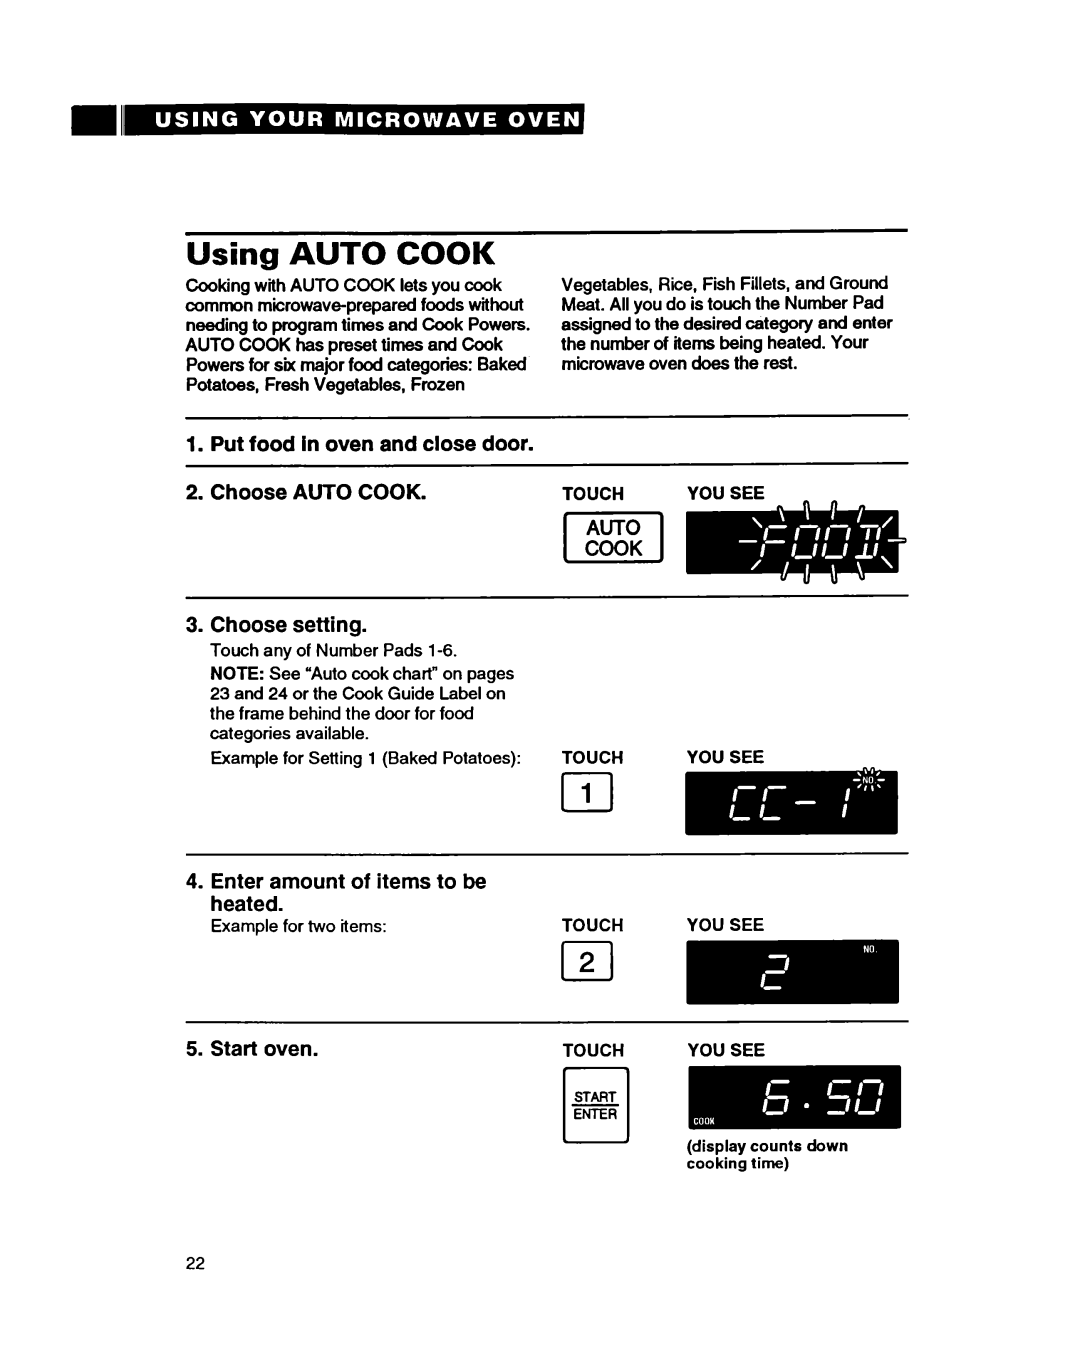 Whirlpool MT9160XBB Using AUTO COOK, Choose AUTO COOK 3.Choose setting, Enter amount of items to be heated, Start oven 